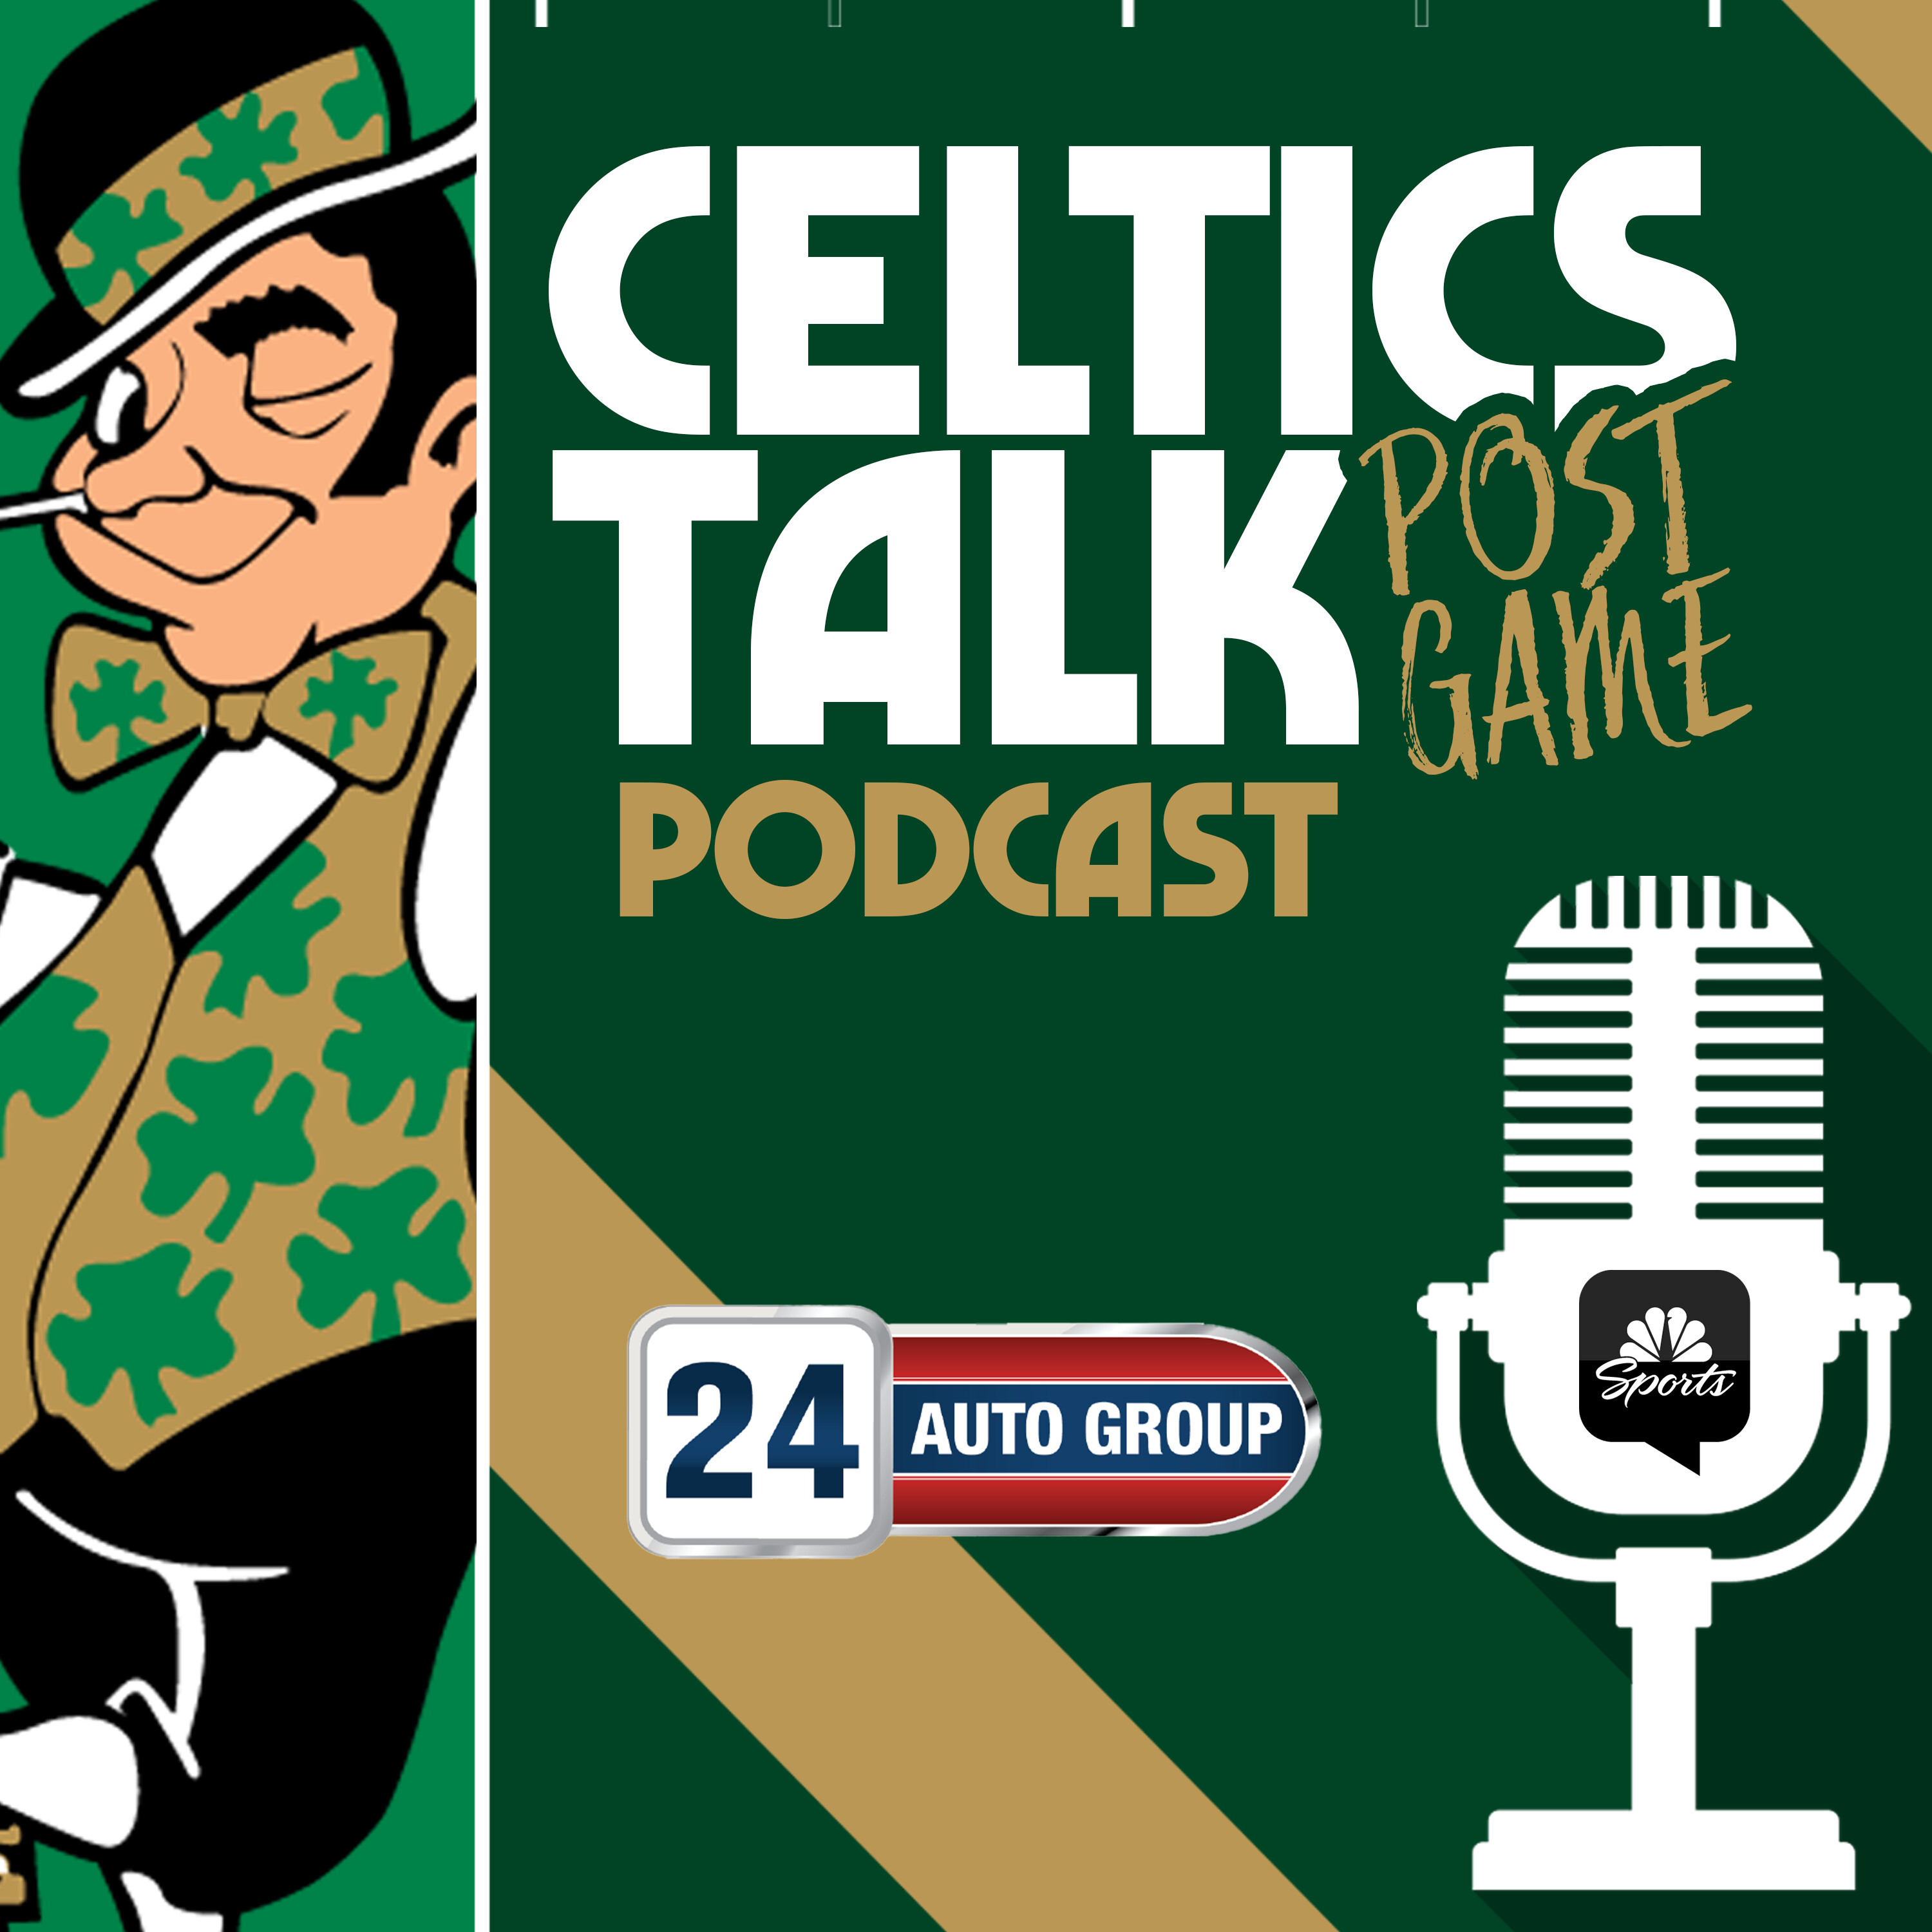 POSTGAME POD: Celtics score THIRD-MOST POINTS IN FRANCHISE HISTORY in dominating 155-104 win over the Pacers